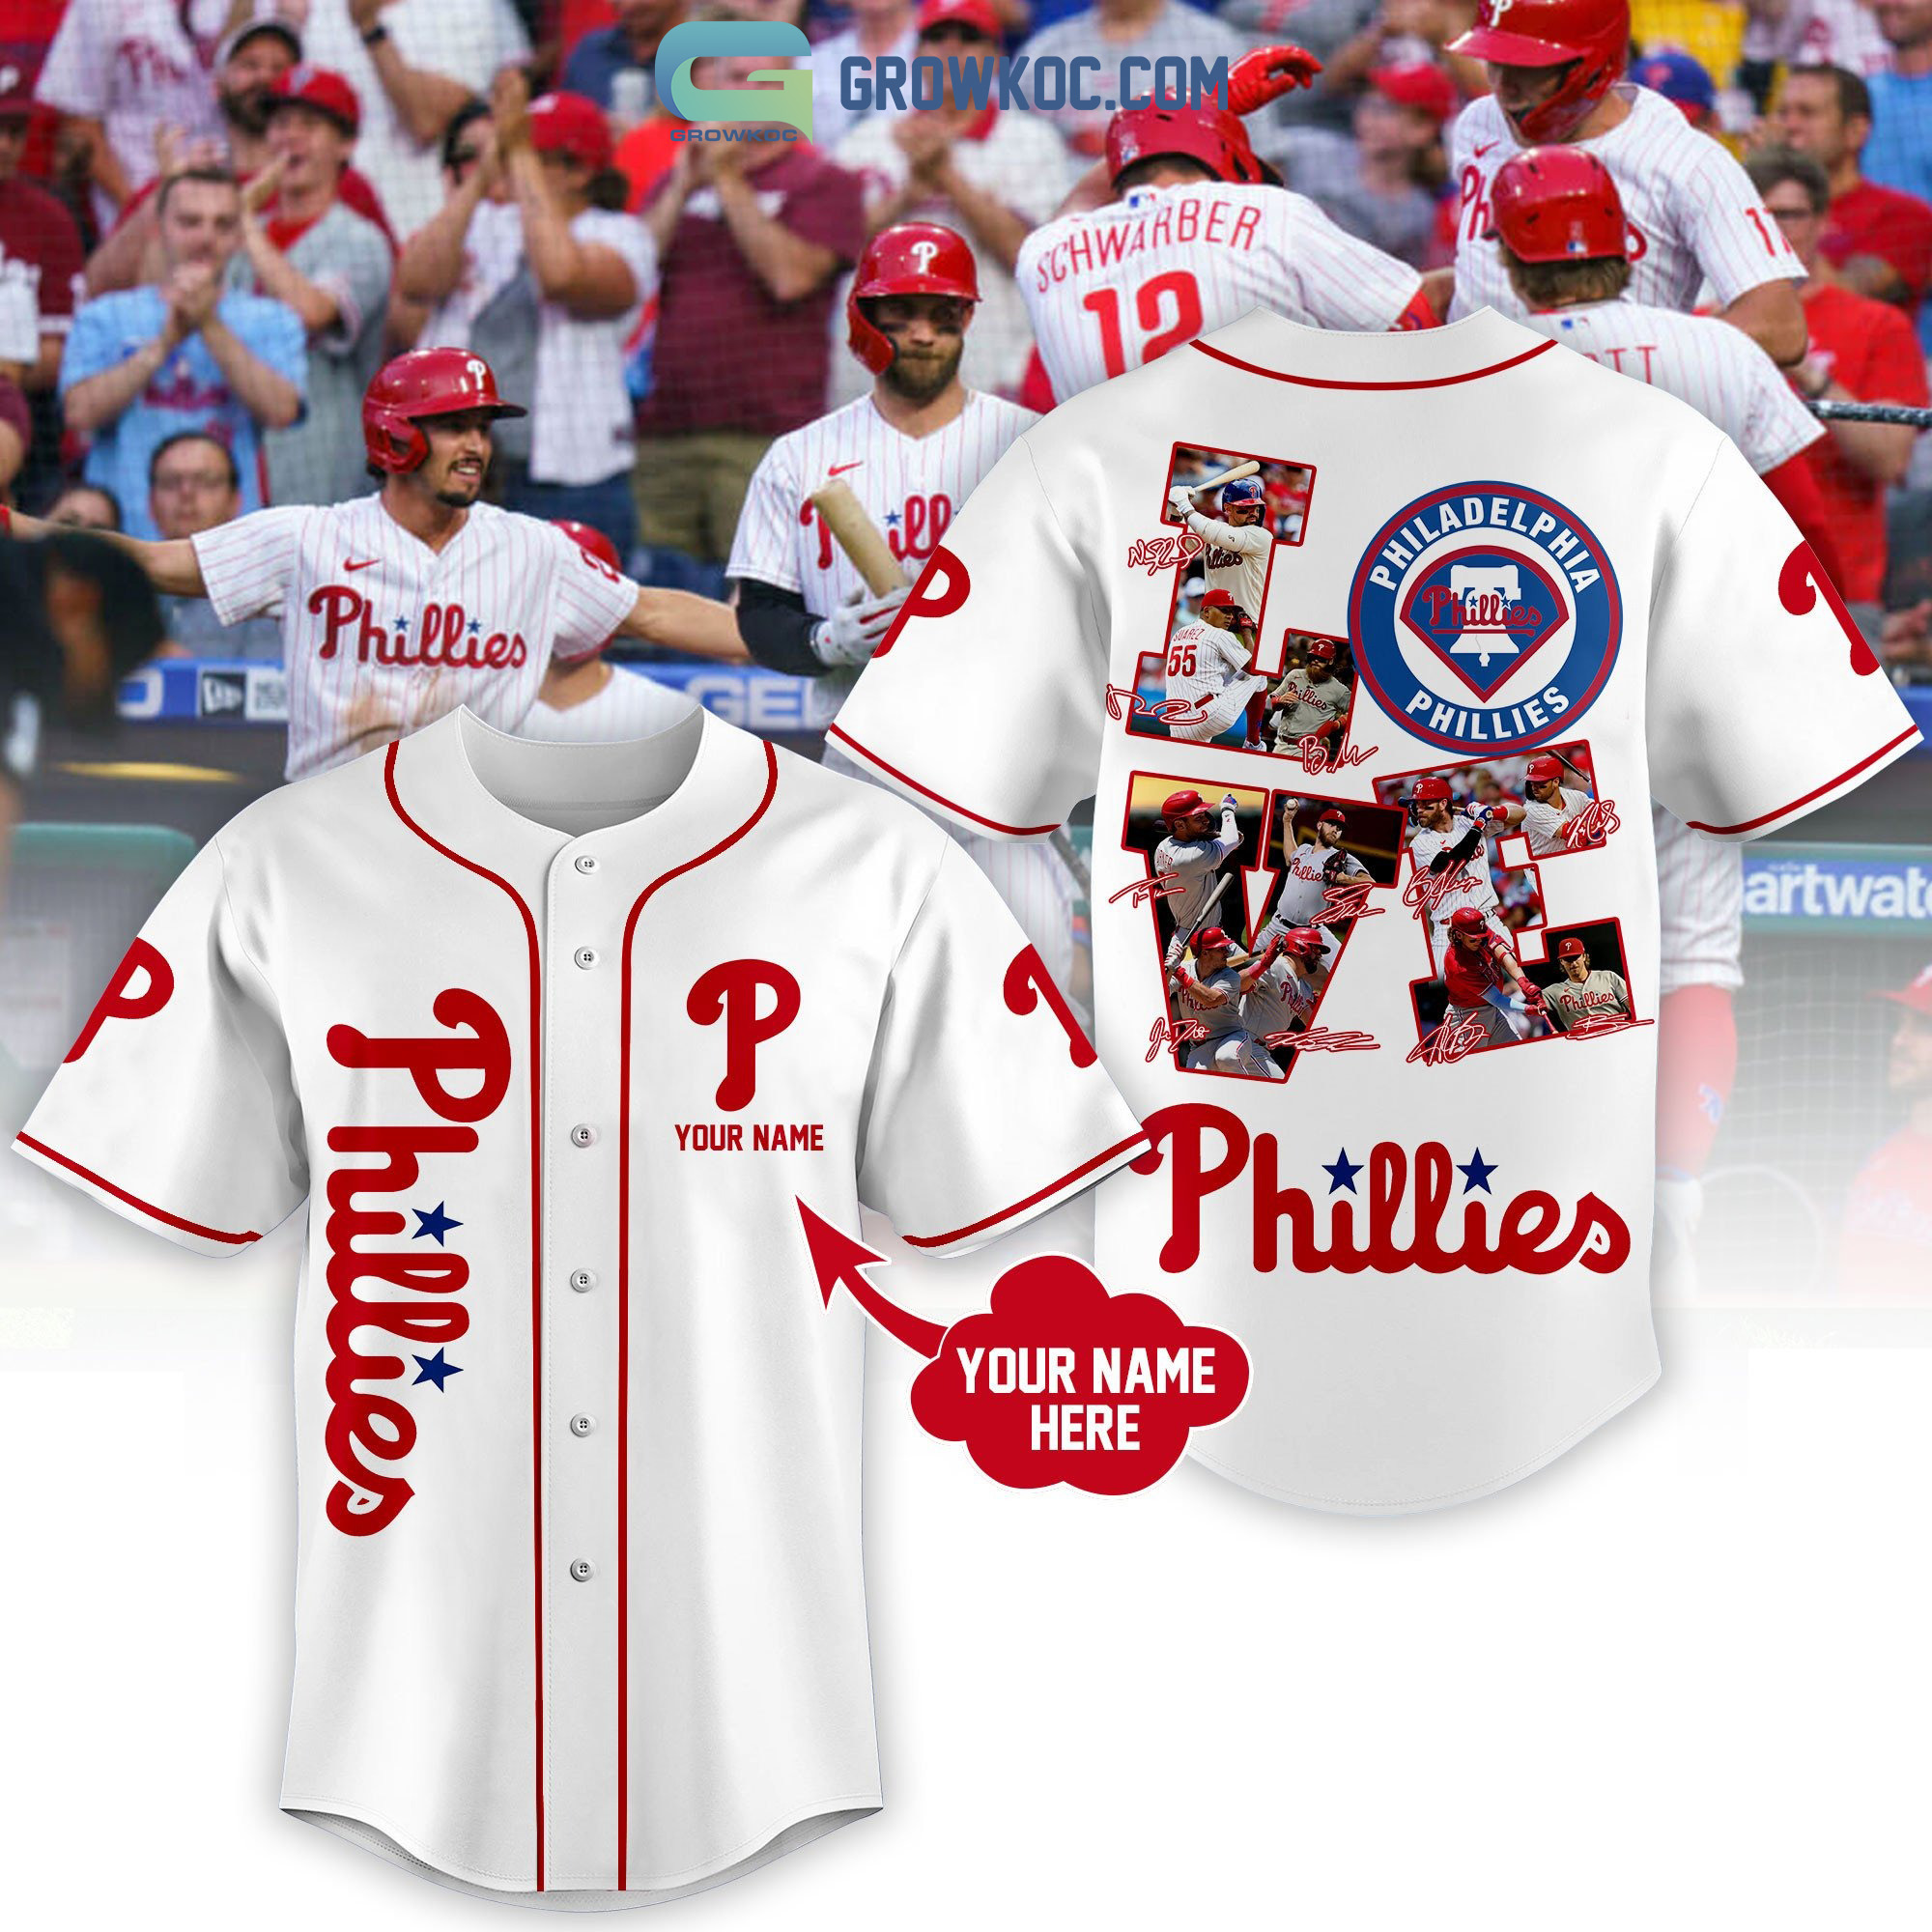 i love this place phillies shirt